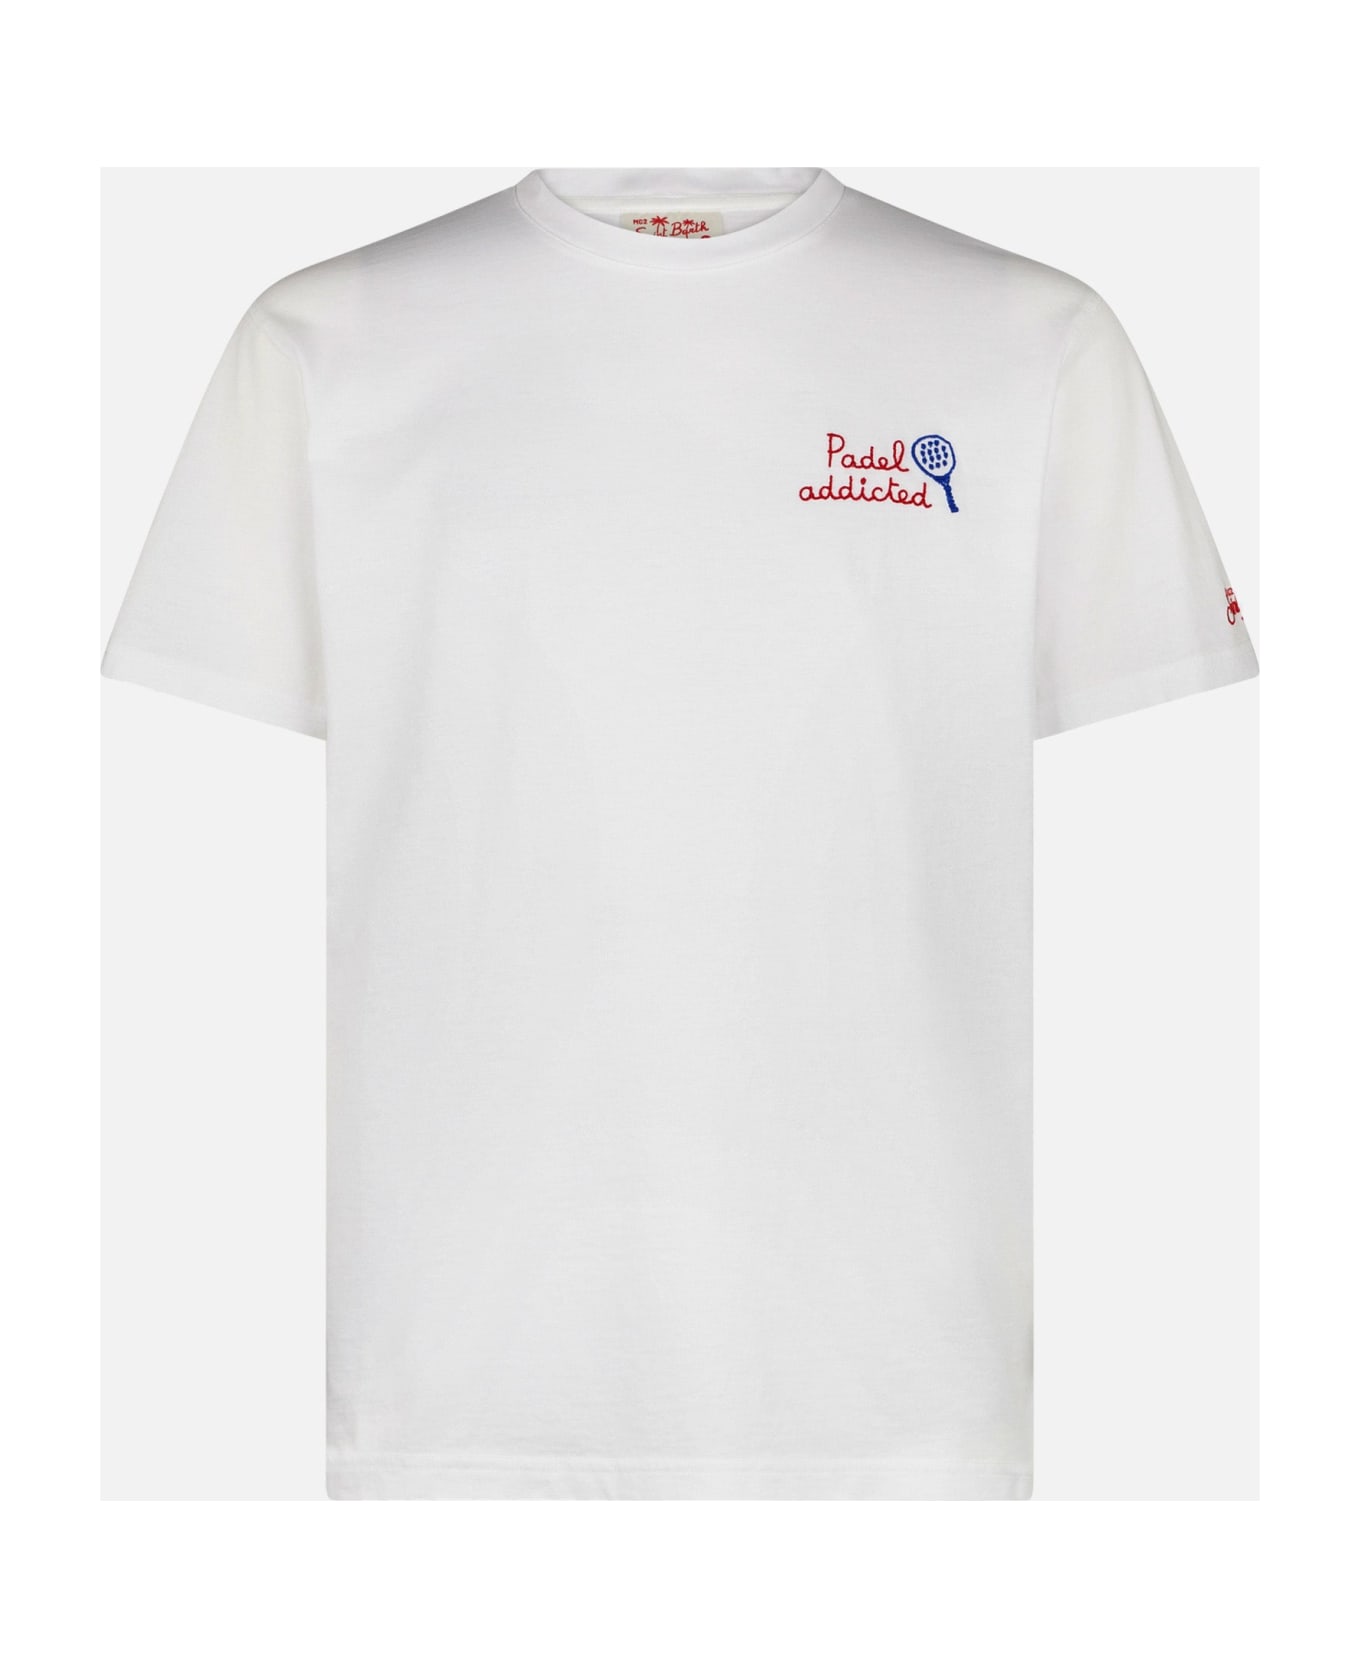 MC2 Saint Barth Man T-shirt With Padel Addicted Front Embroidery - WHITE シャツ